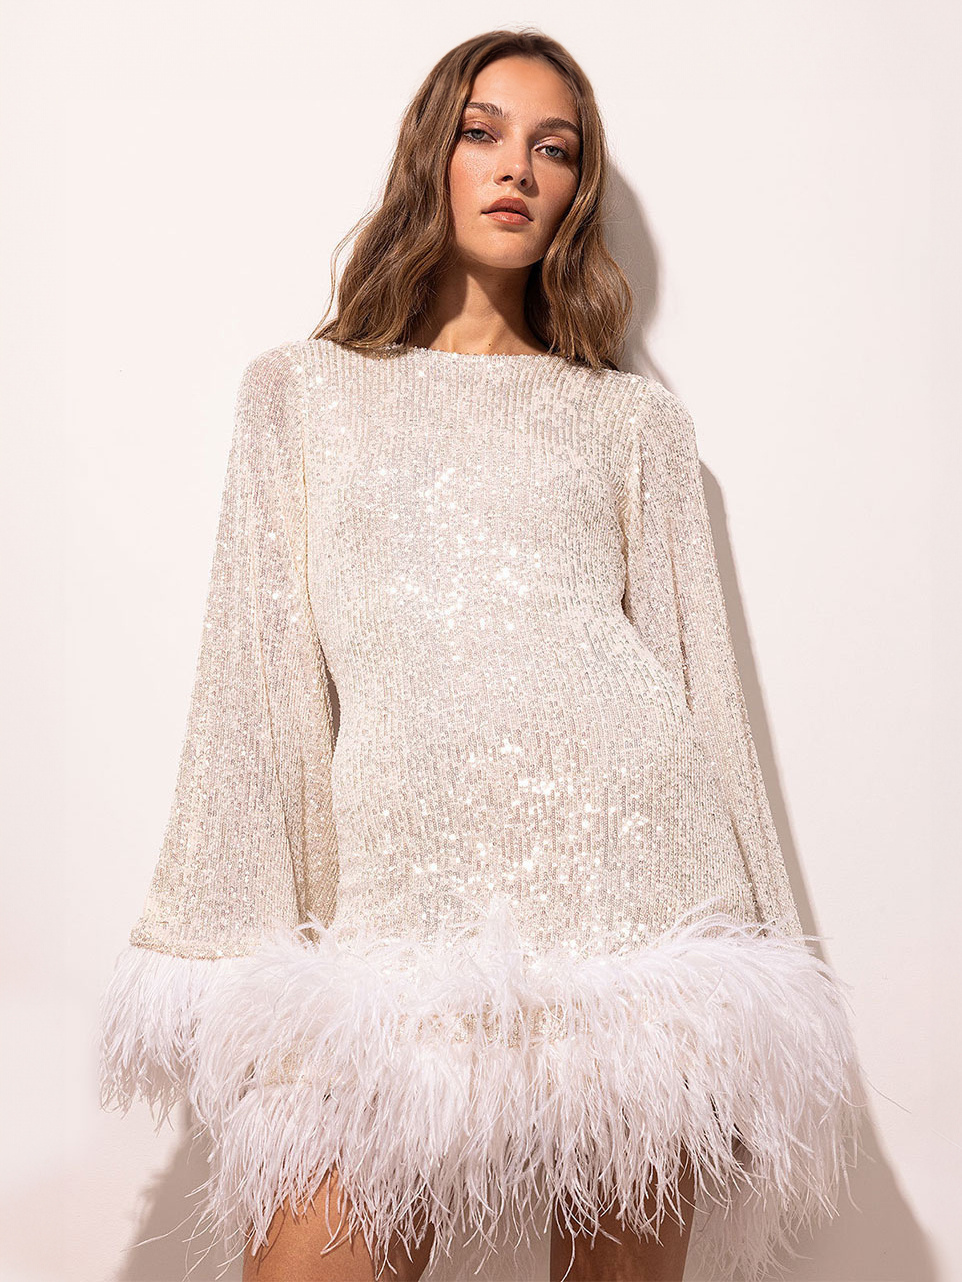 White Sequins Dress Flared Sleeves Feather Trim Backless Sexy Mini Dre